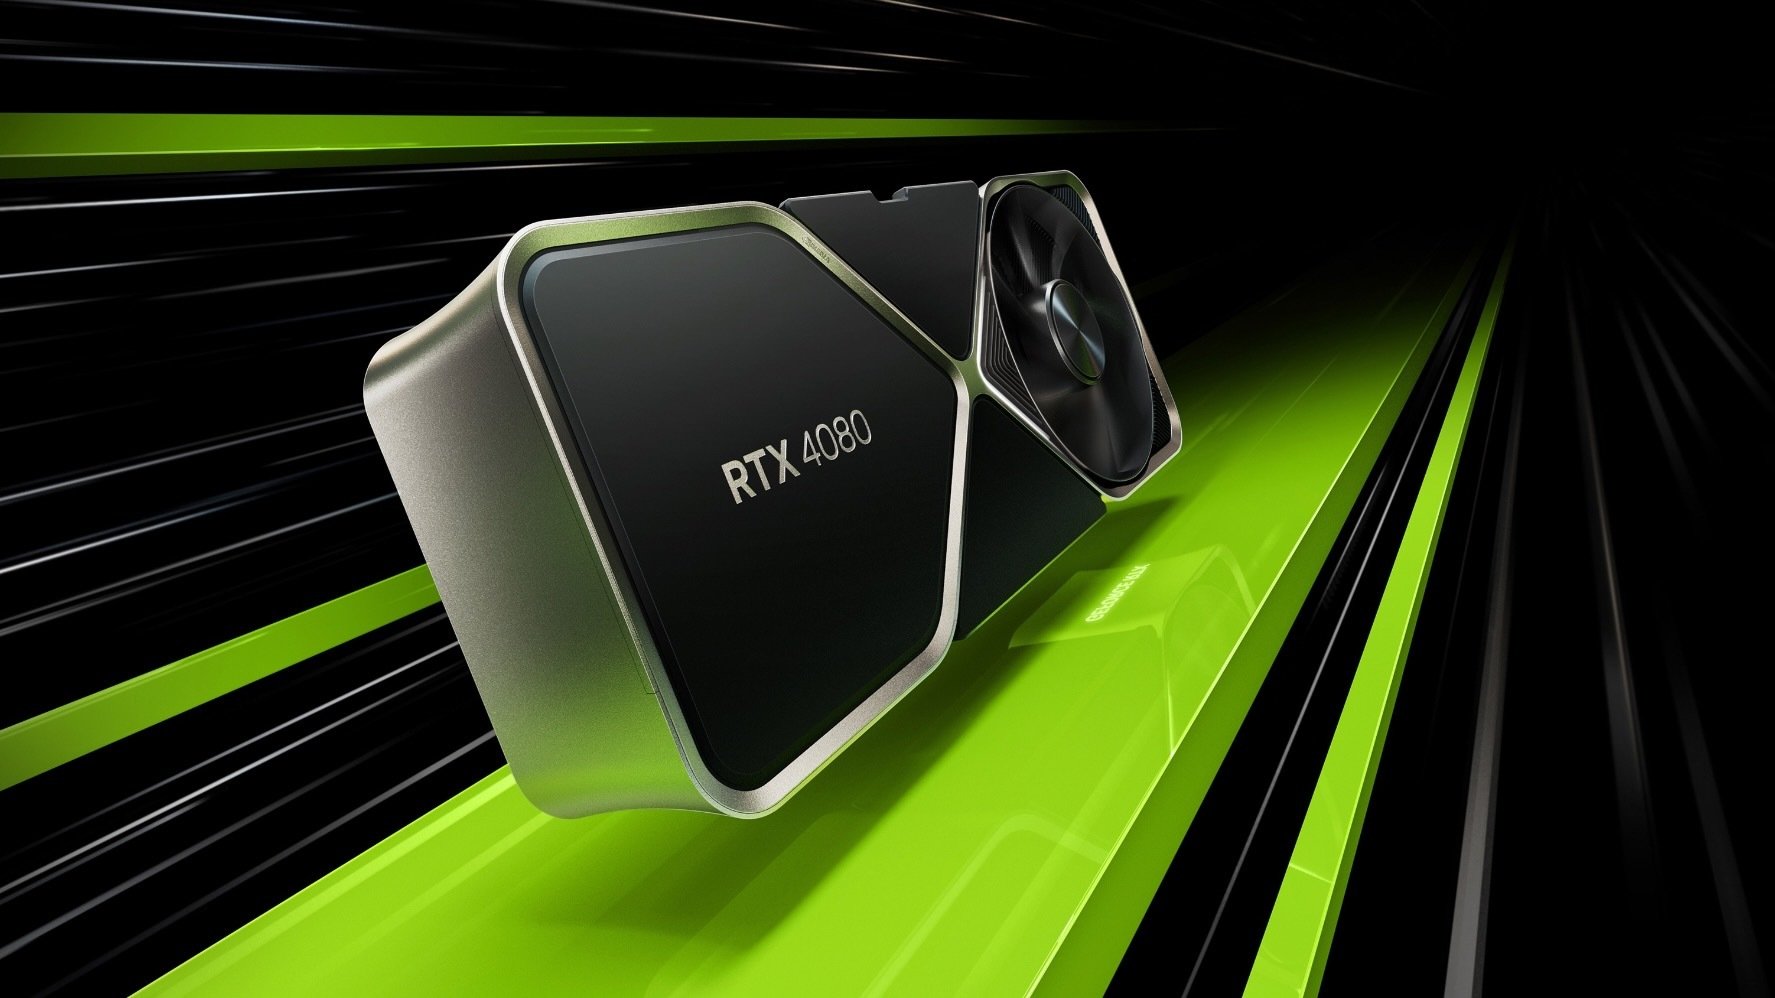 Vendors and speculators finally learned a good lesson with the NVIDIA GeForce RTX 4080 – Nvidia